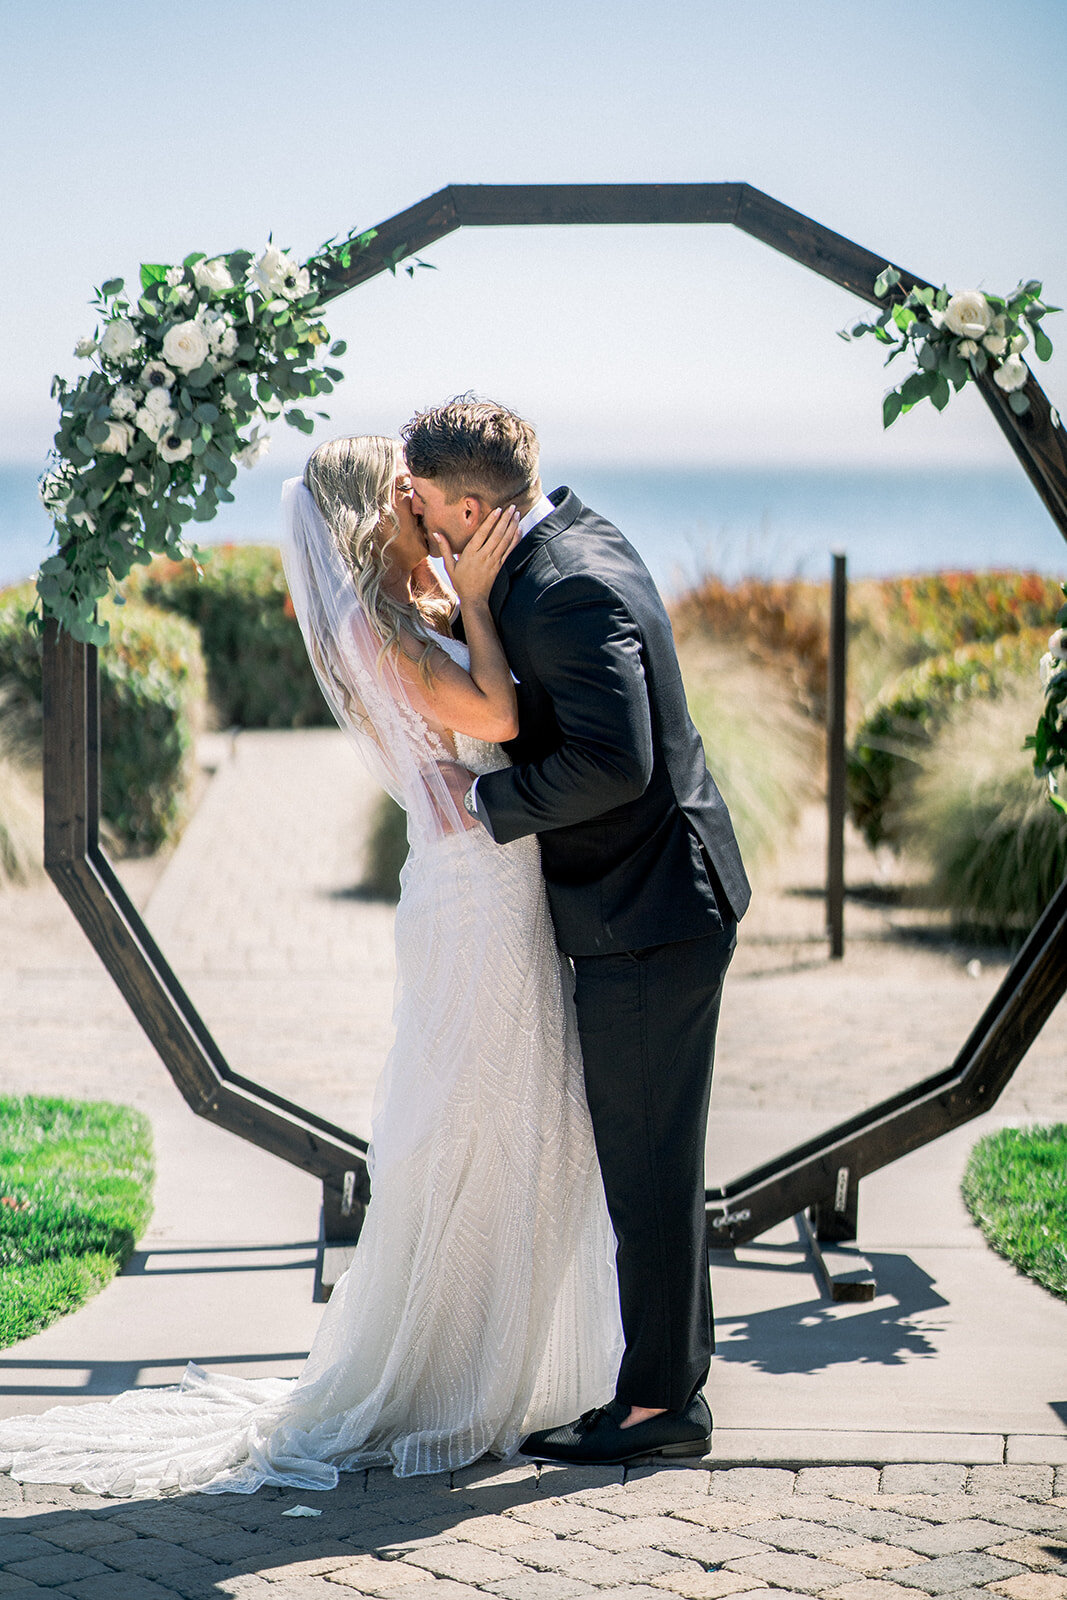 wedding ceremony kiss at Dolphin Bay Resort in Pismo Beach, CA